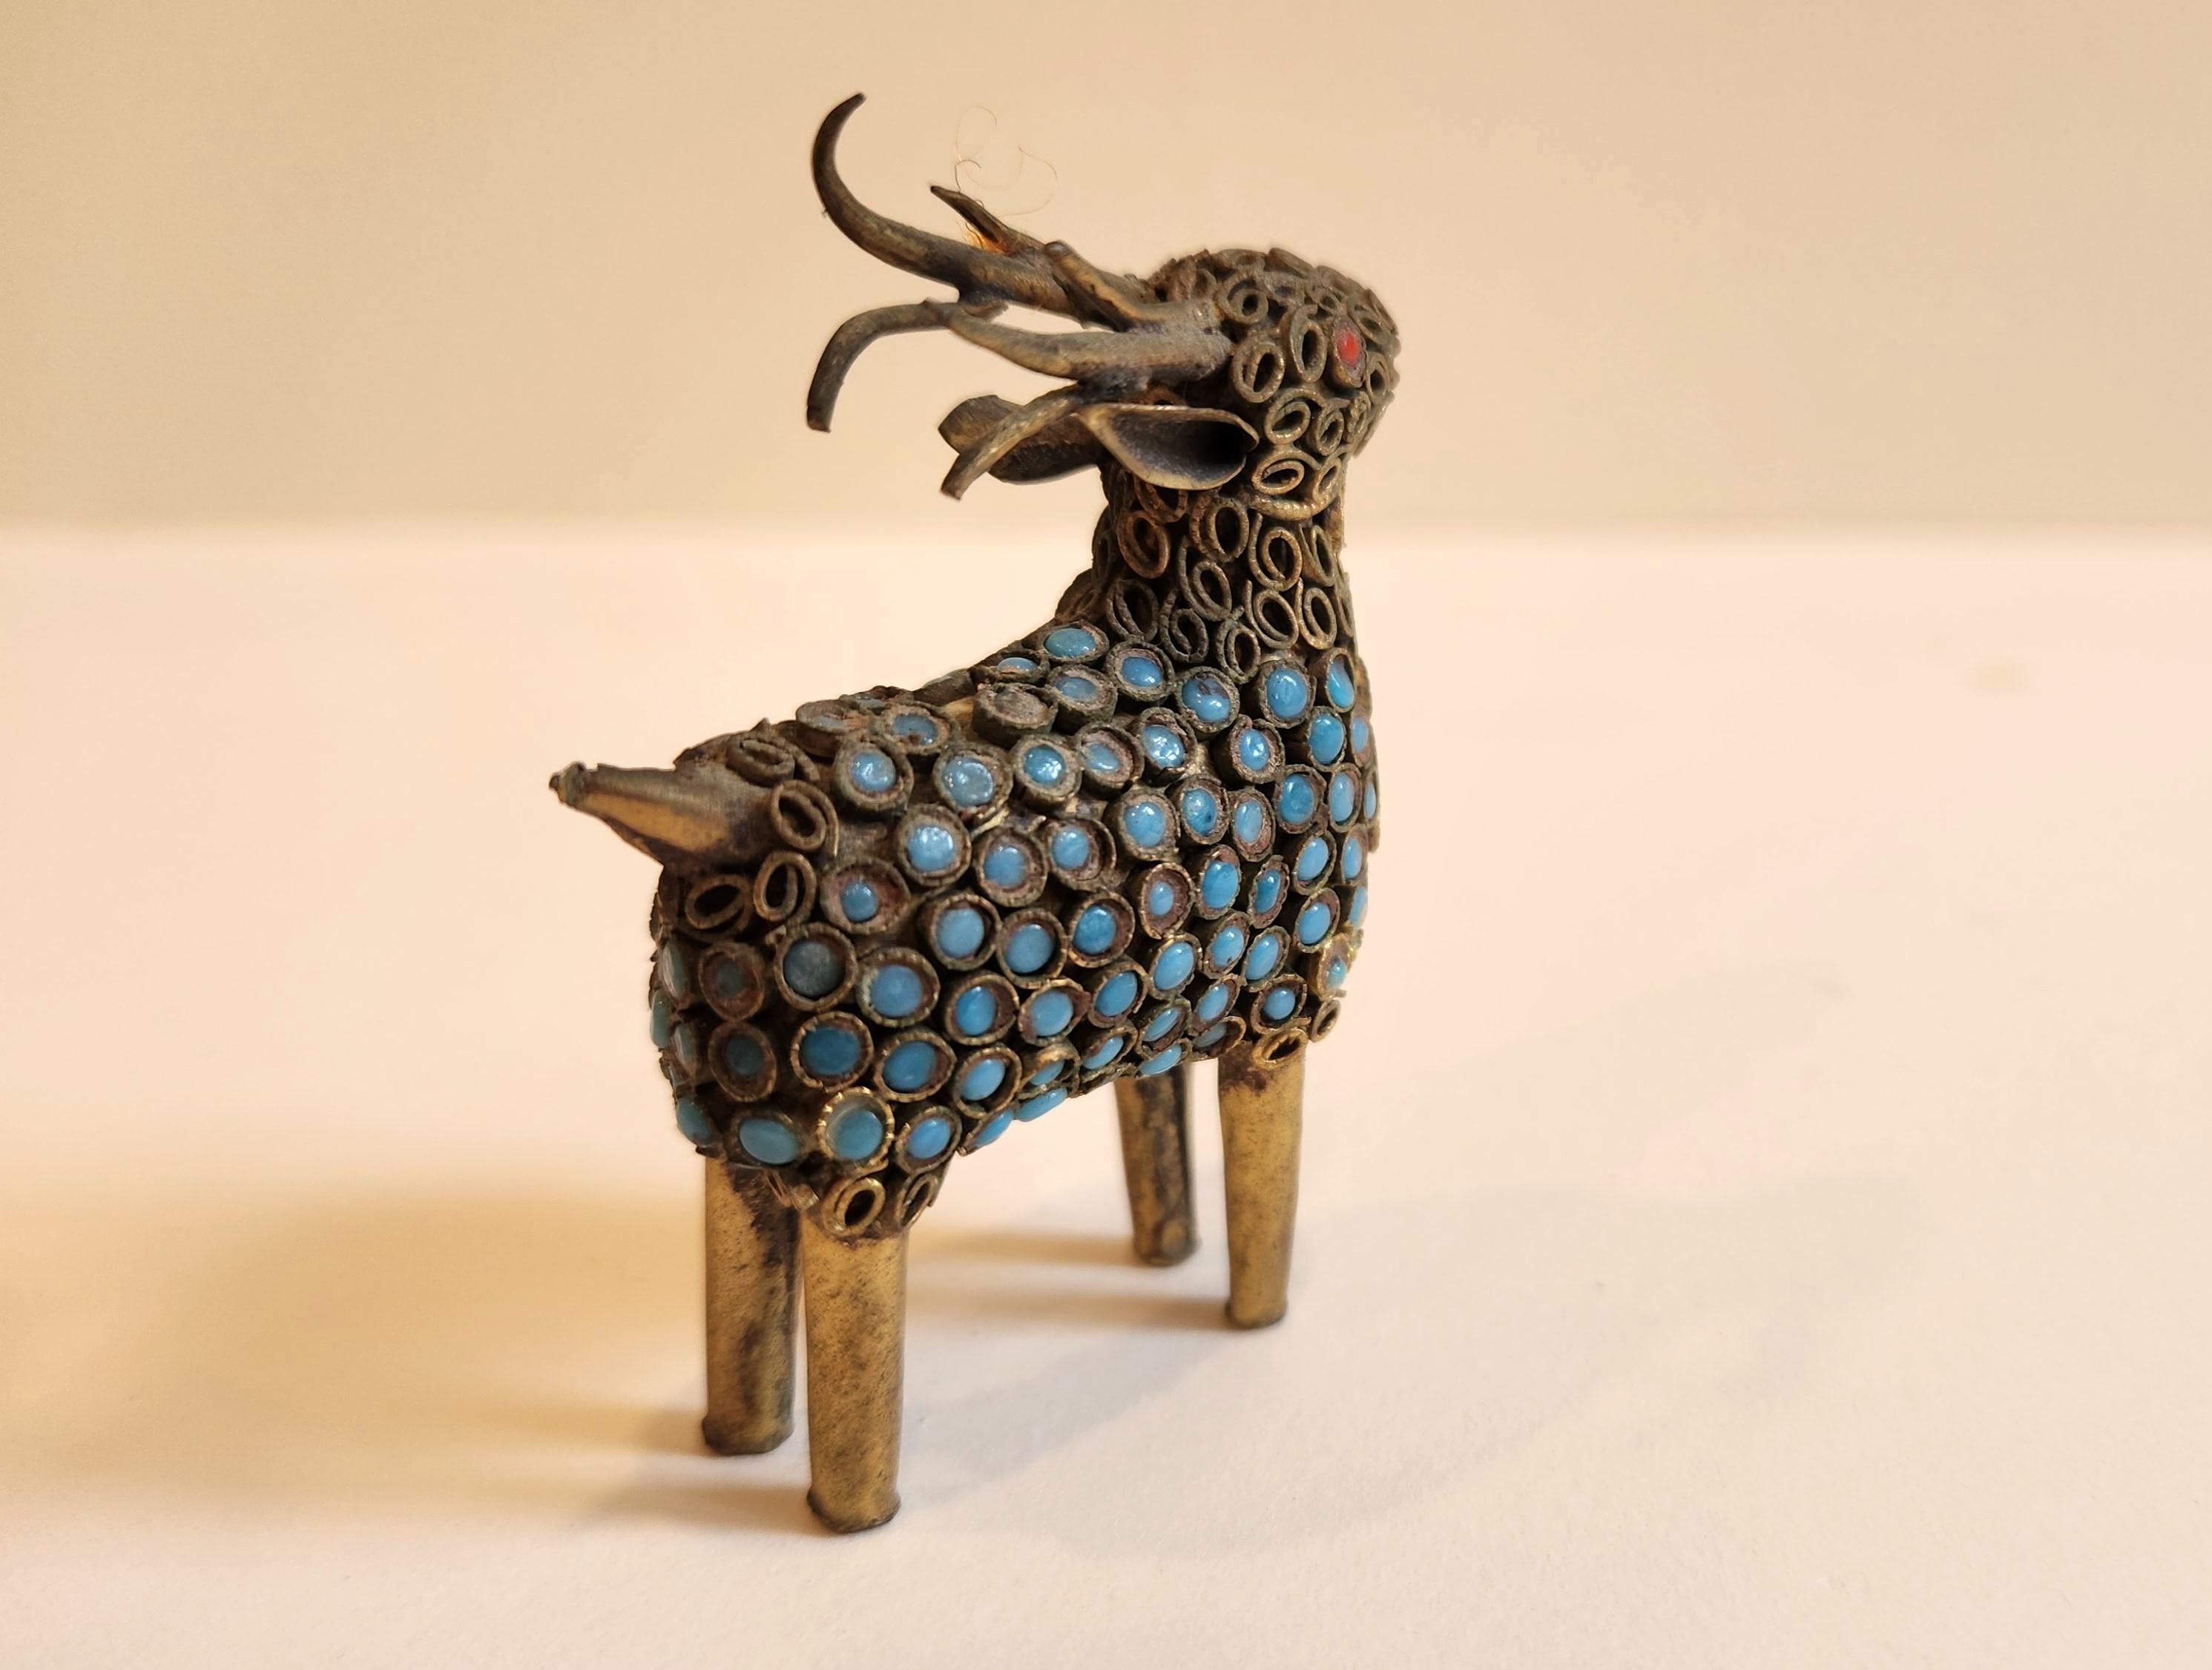 Turquoise and Coral Ram from Nepal - Sculpture by Unknown